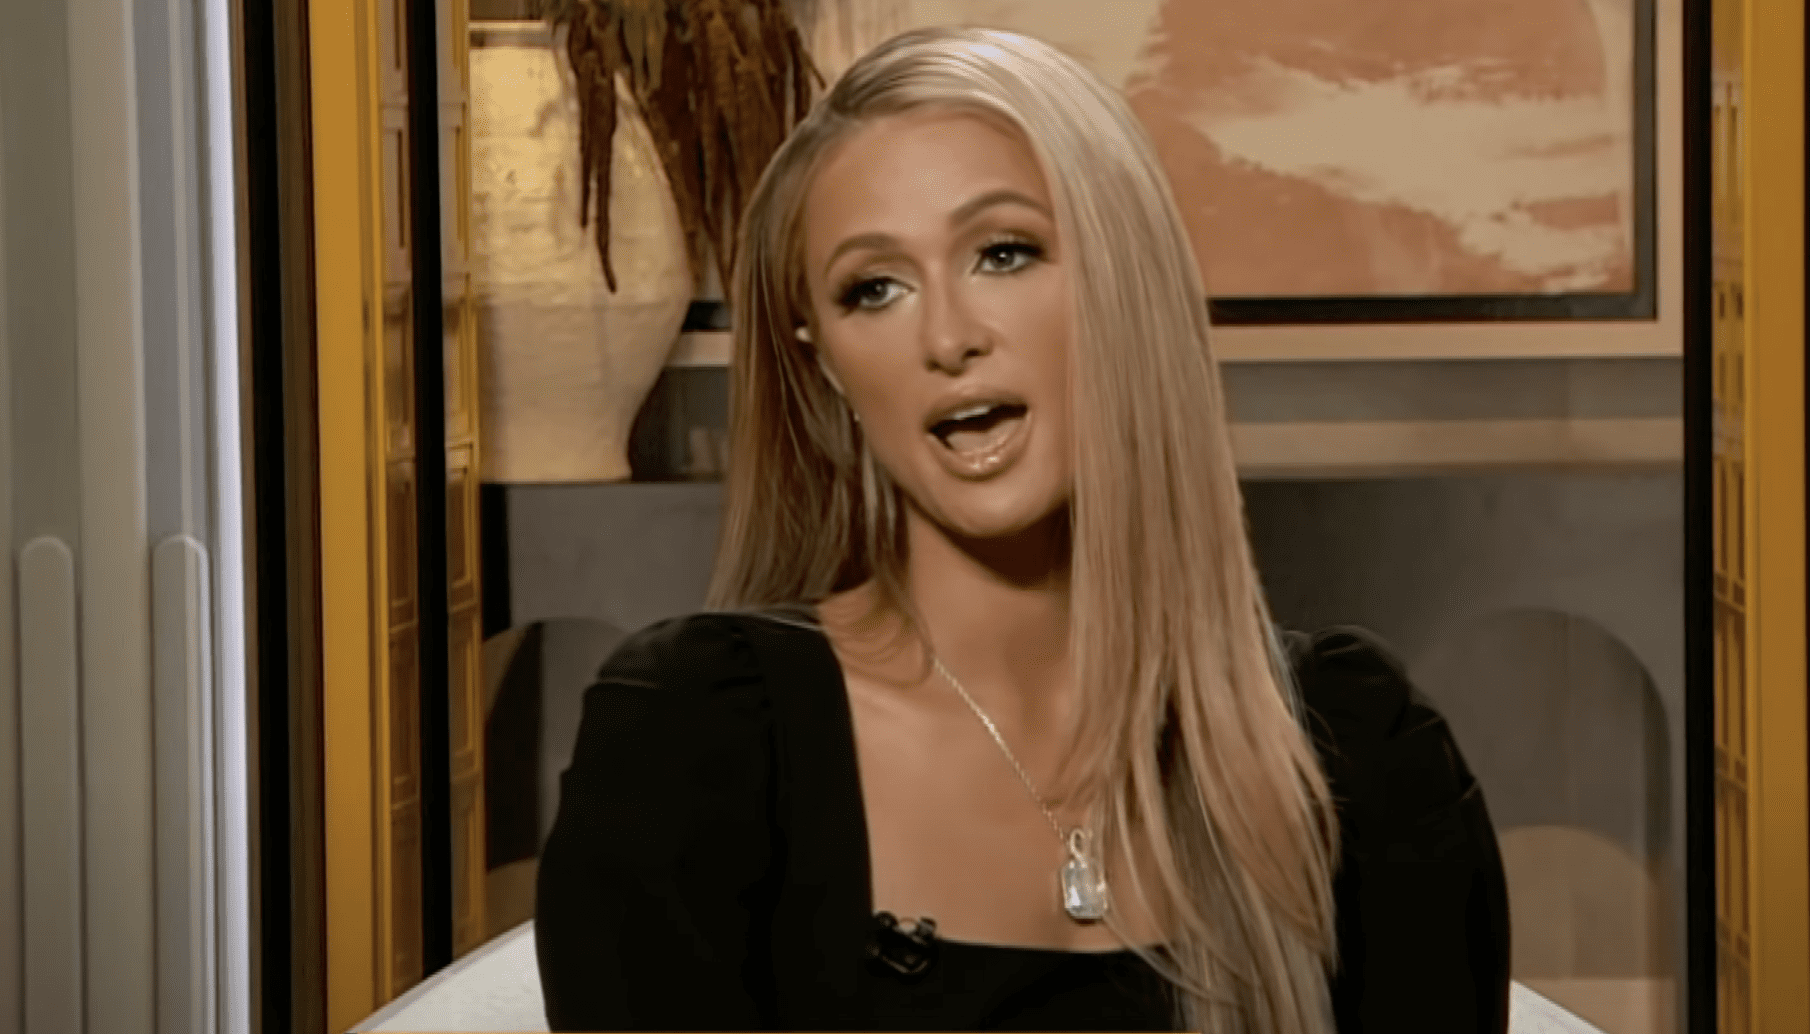 Paris Hilton and Kanye Connected? "The Held Me Down, Spread My Legs..." [WARNING: Graphic]